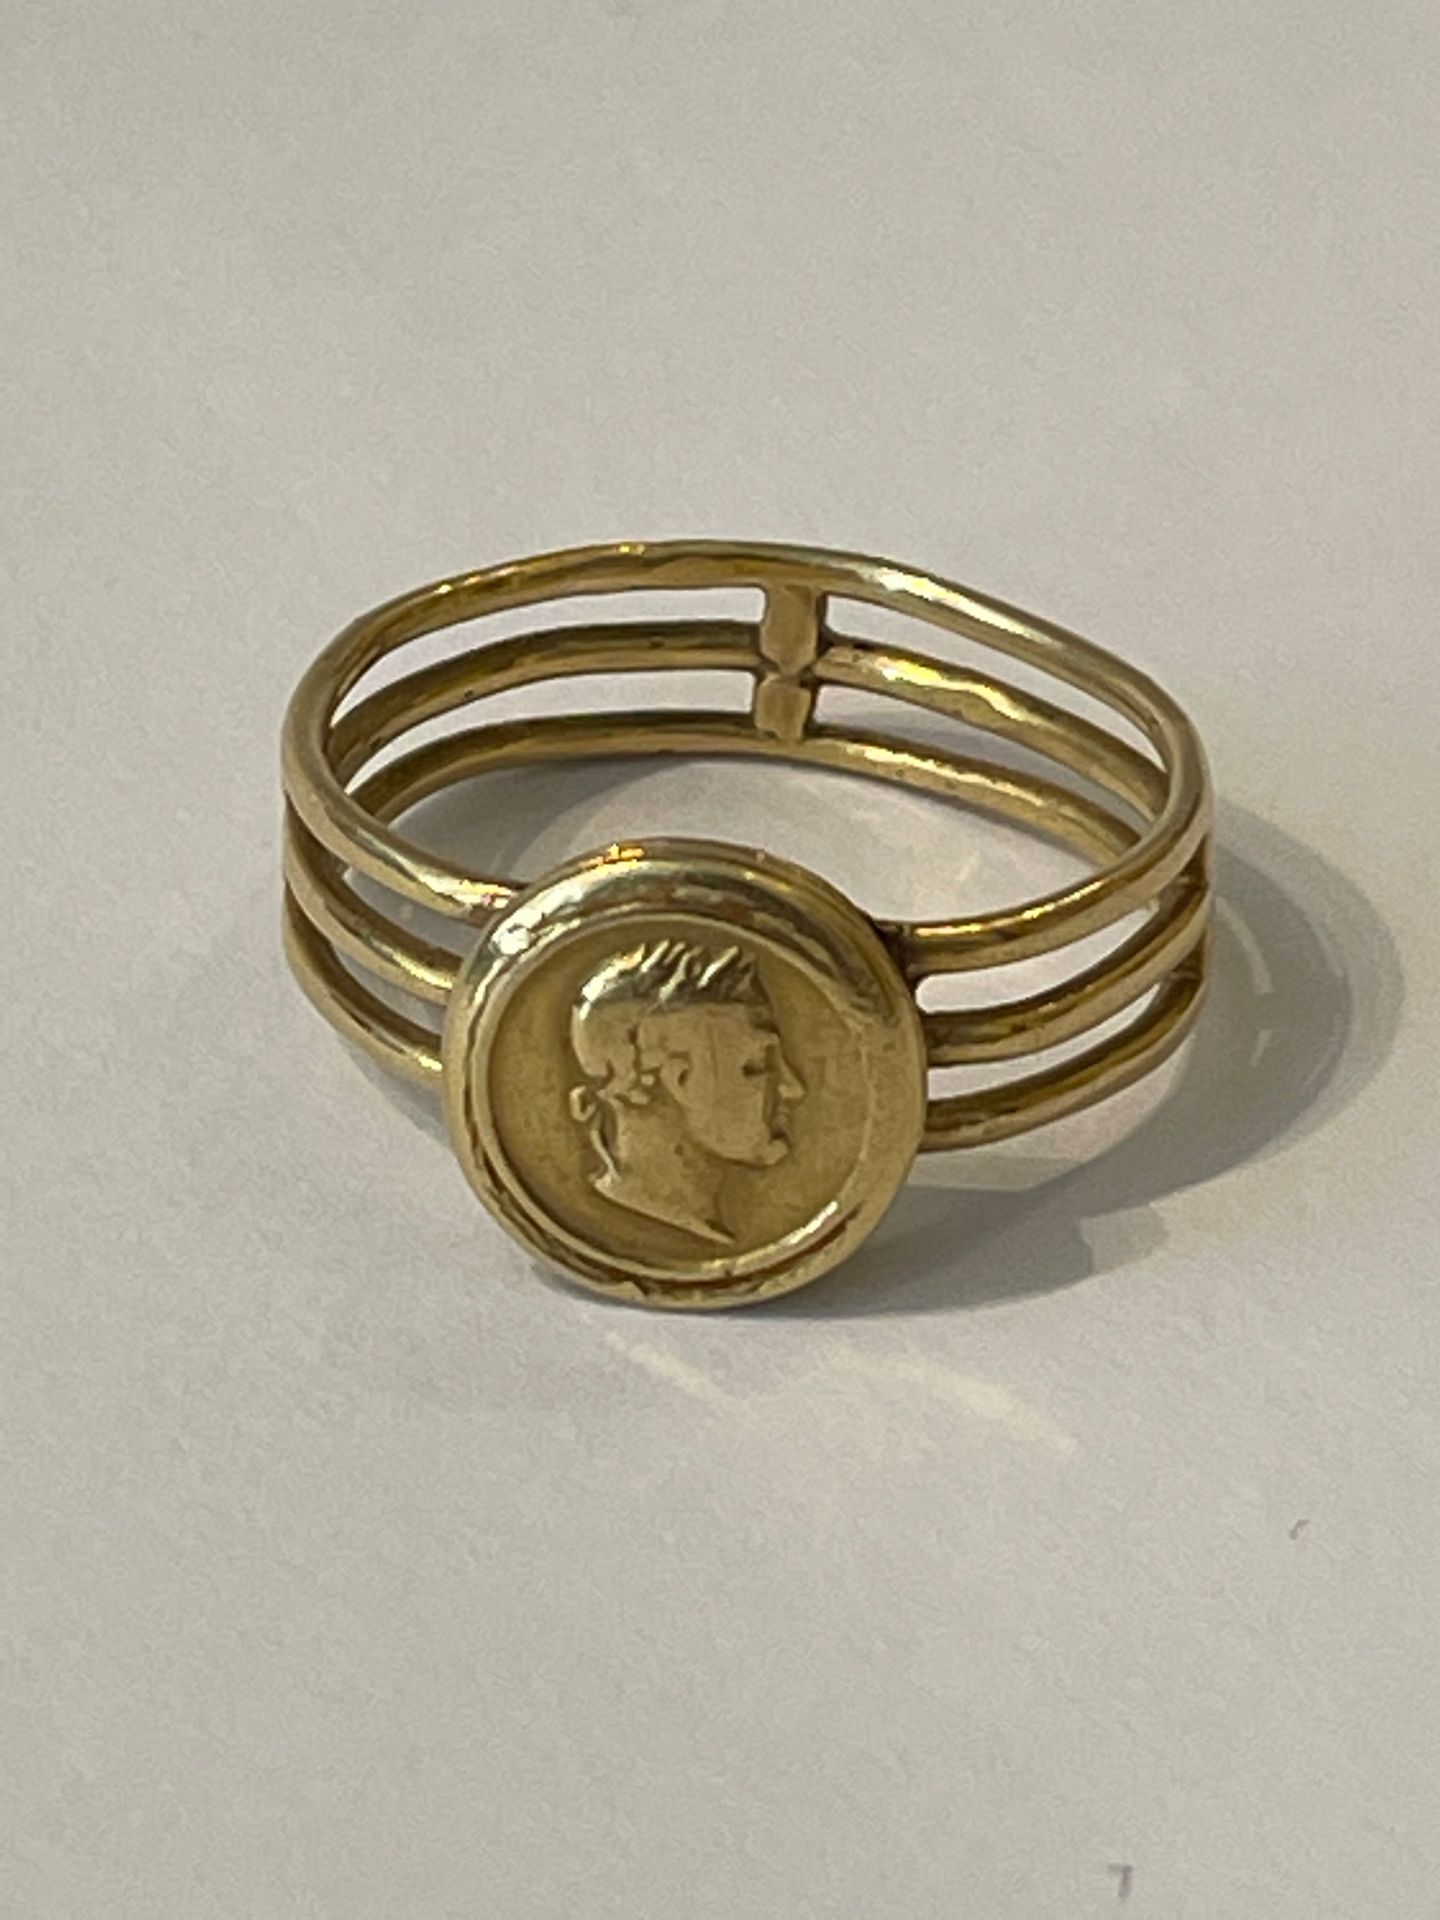 Null GOLDEN RING WITH PORTRAIT OF ALEXANDER I

This type of ring was awarded to &hellip;